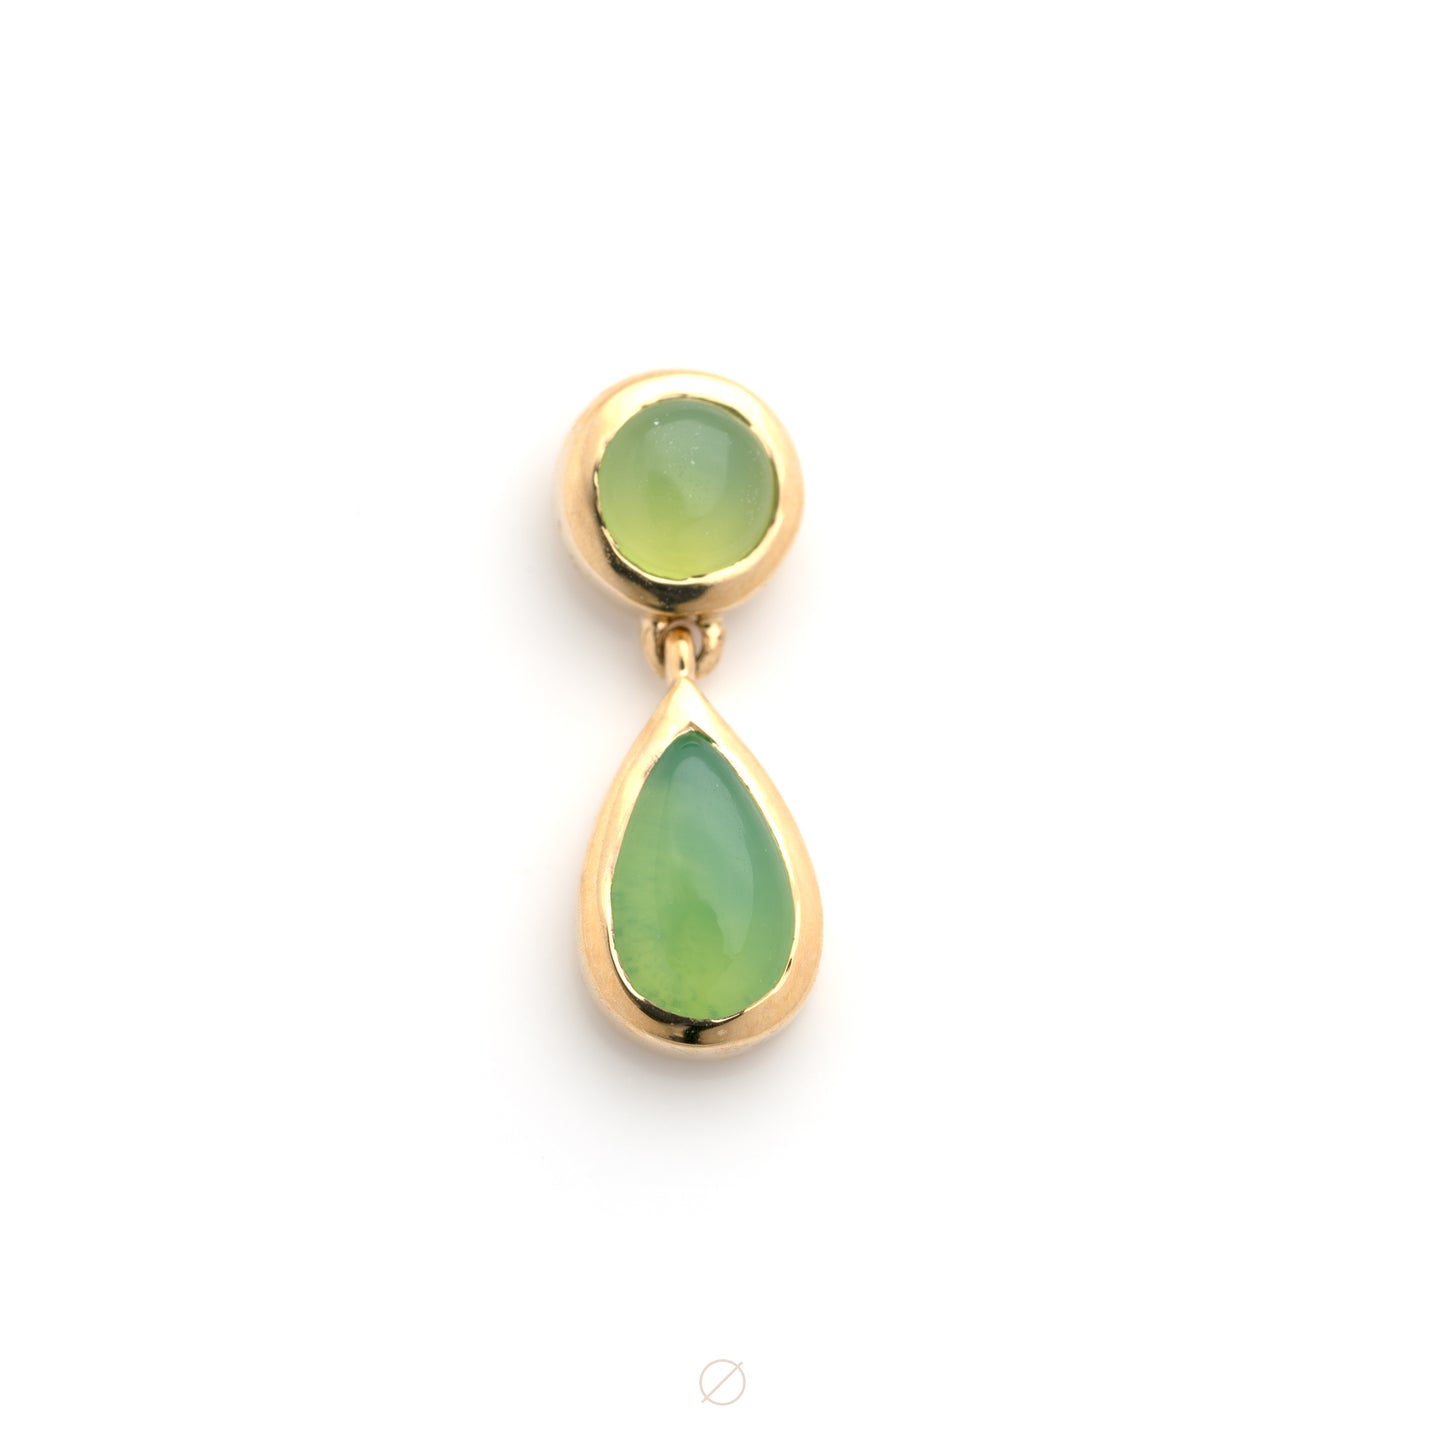 Scarlett with Bezel Set Round and Pear Chrysoprase in Yellow Gold Press-Fit End by Modern Mood